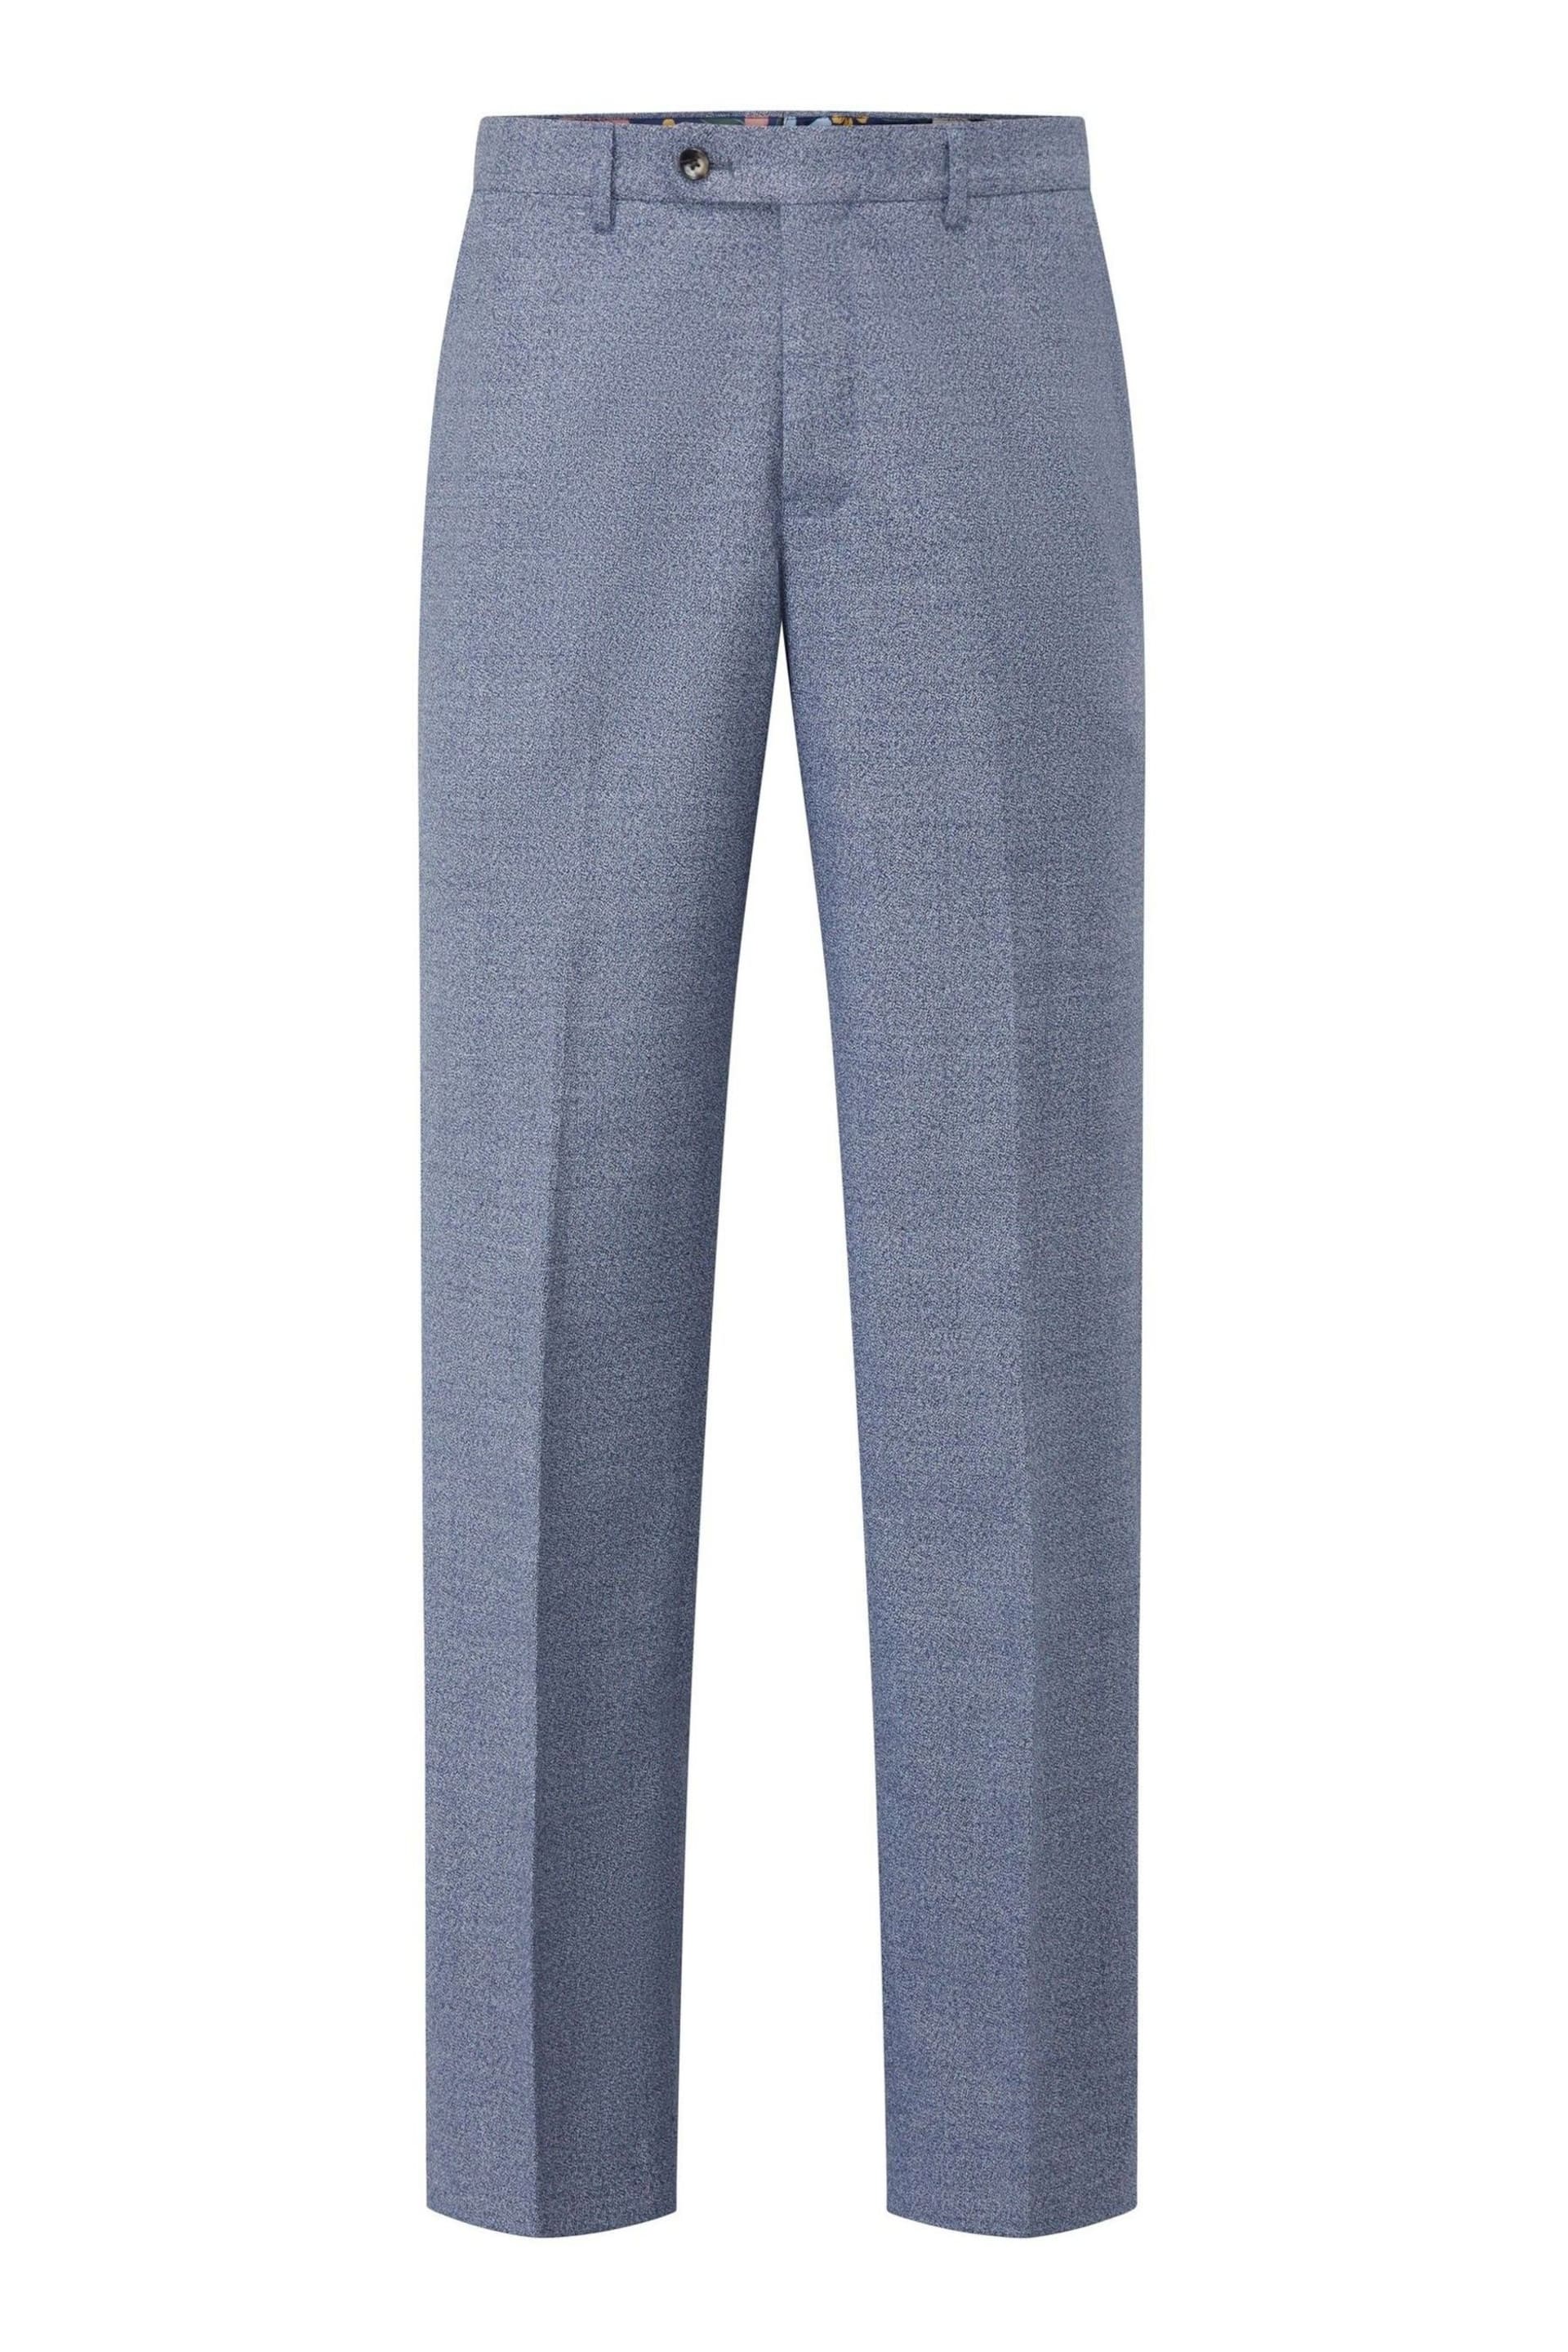 Skopes Tailored Fit Jodrell Marl Tweed Suit: Trousers - Image 3 of 4